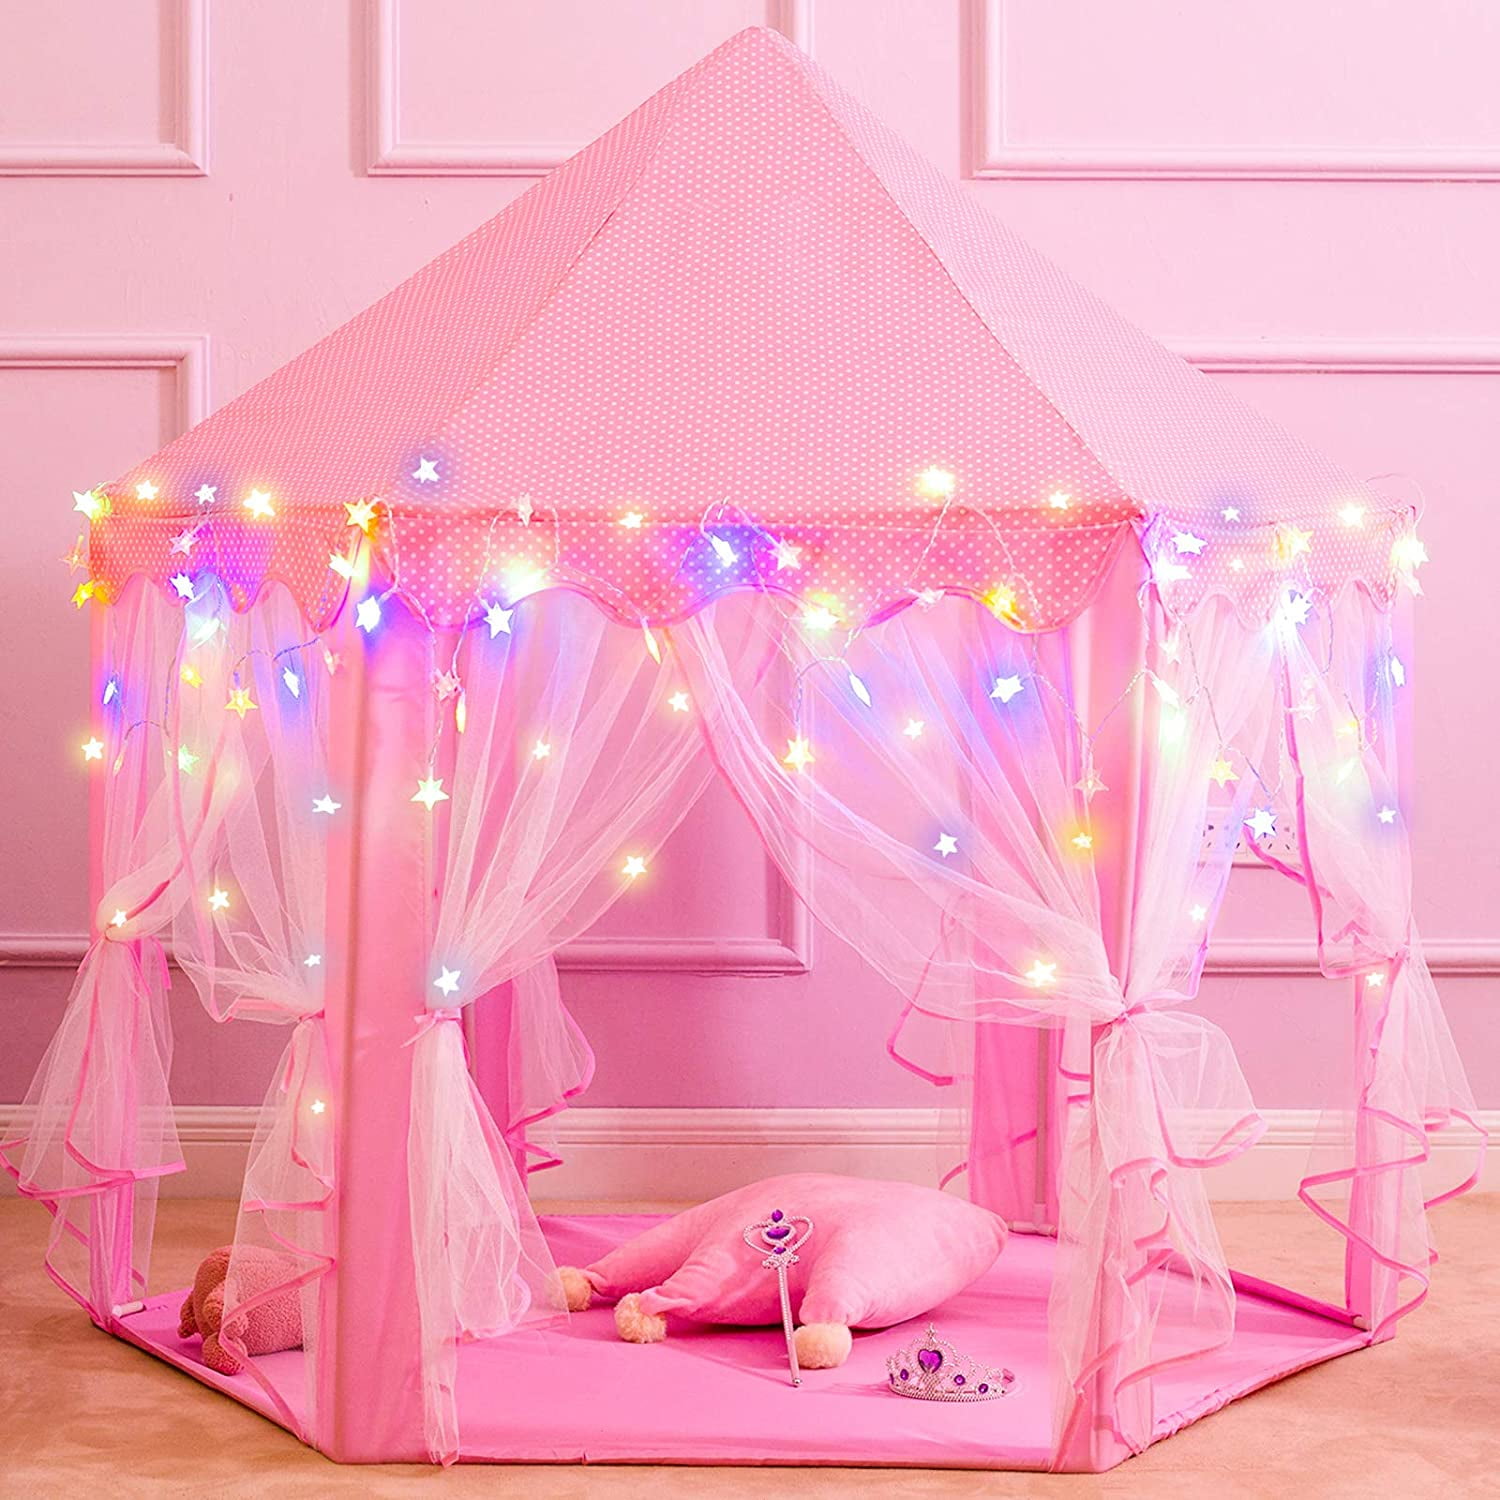 Volscity Princess Tent for Girls,Kids Castle Play Tent with LED Star Lights,Large Playhouse Girl Toy Gifts Age 3+,Indoor and Outdoor Games 55.5x 53 DxH Pink 